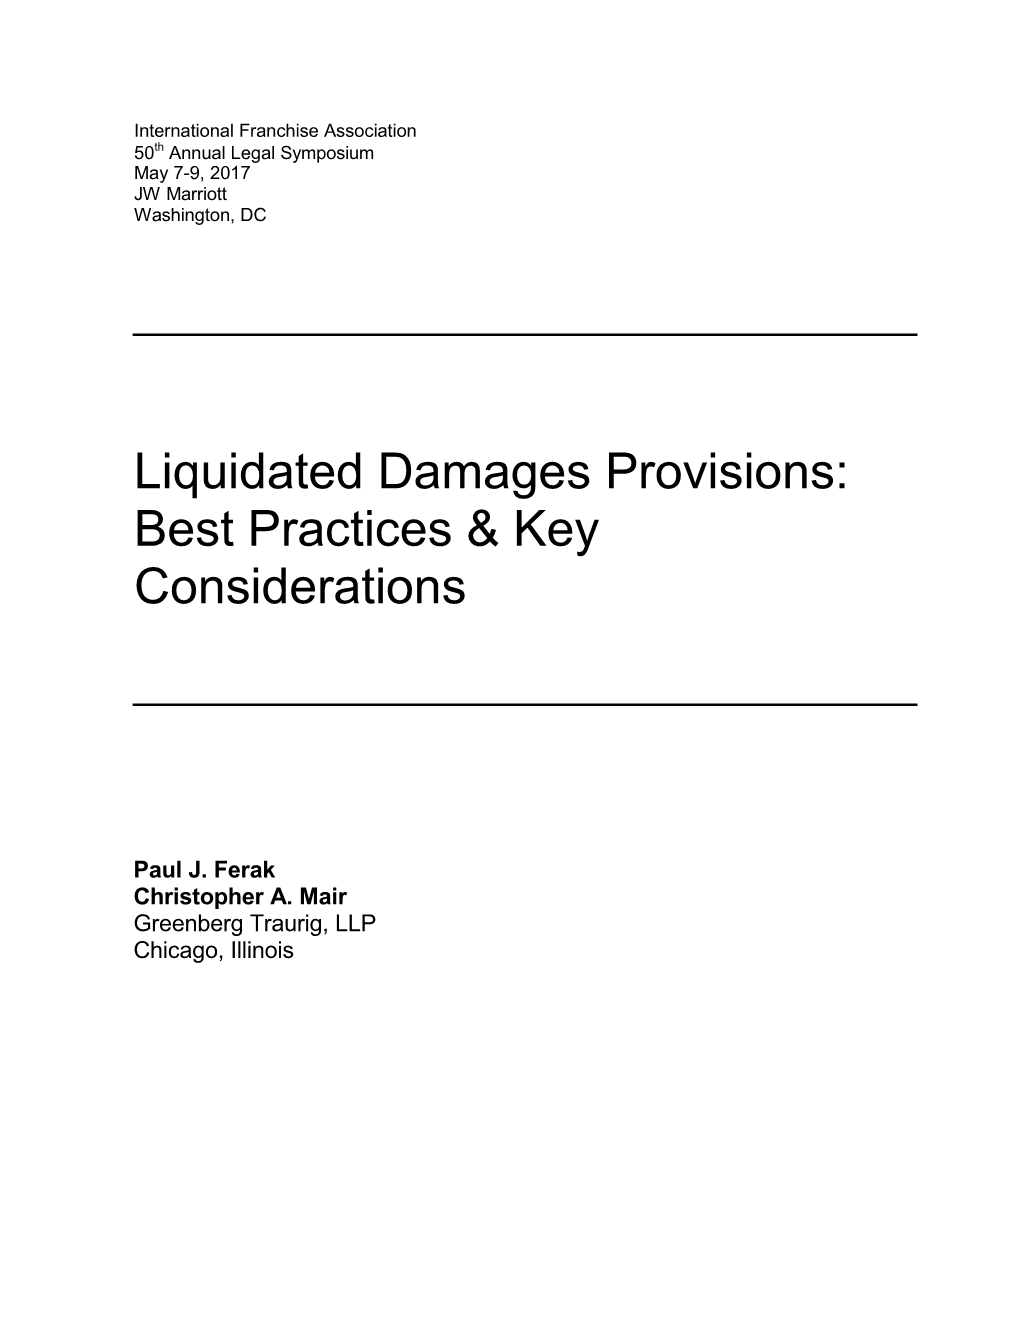 Liquidated Damages Provisions: Best Practices & Key Considerations